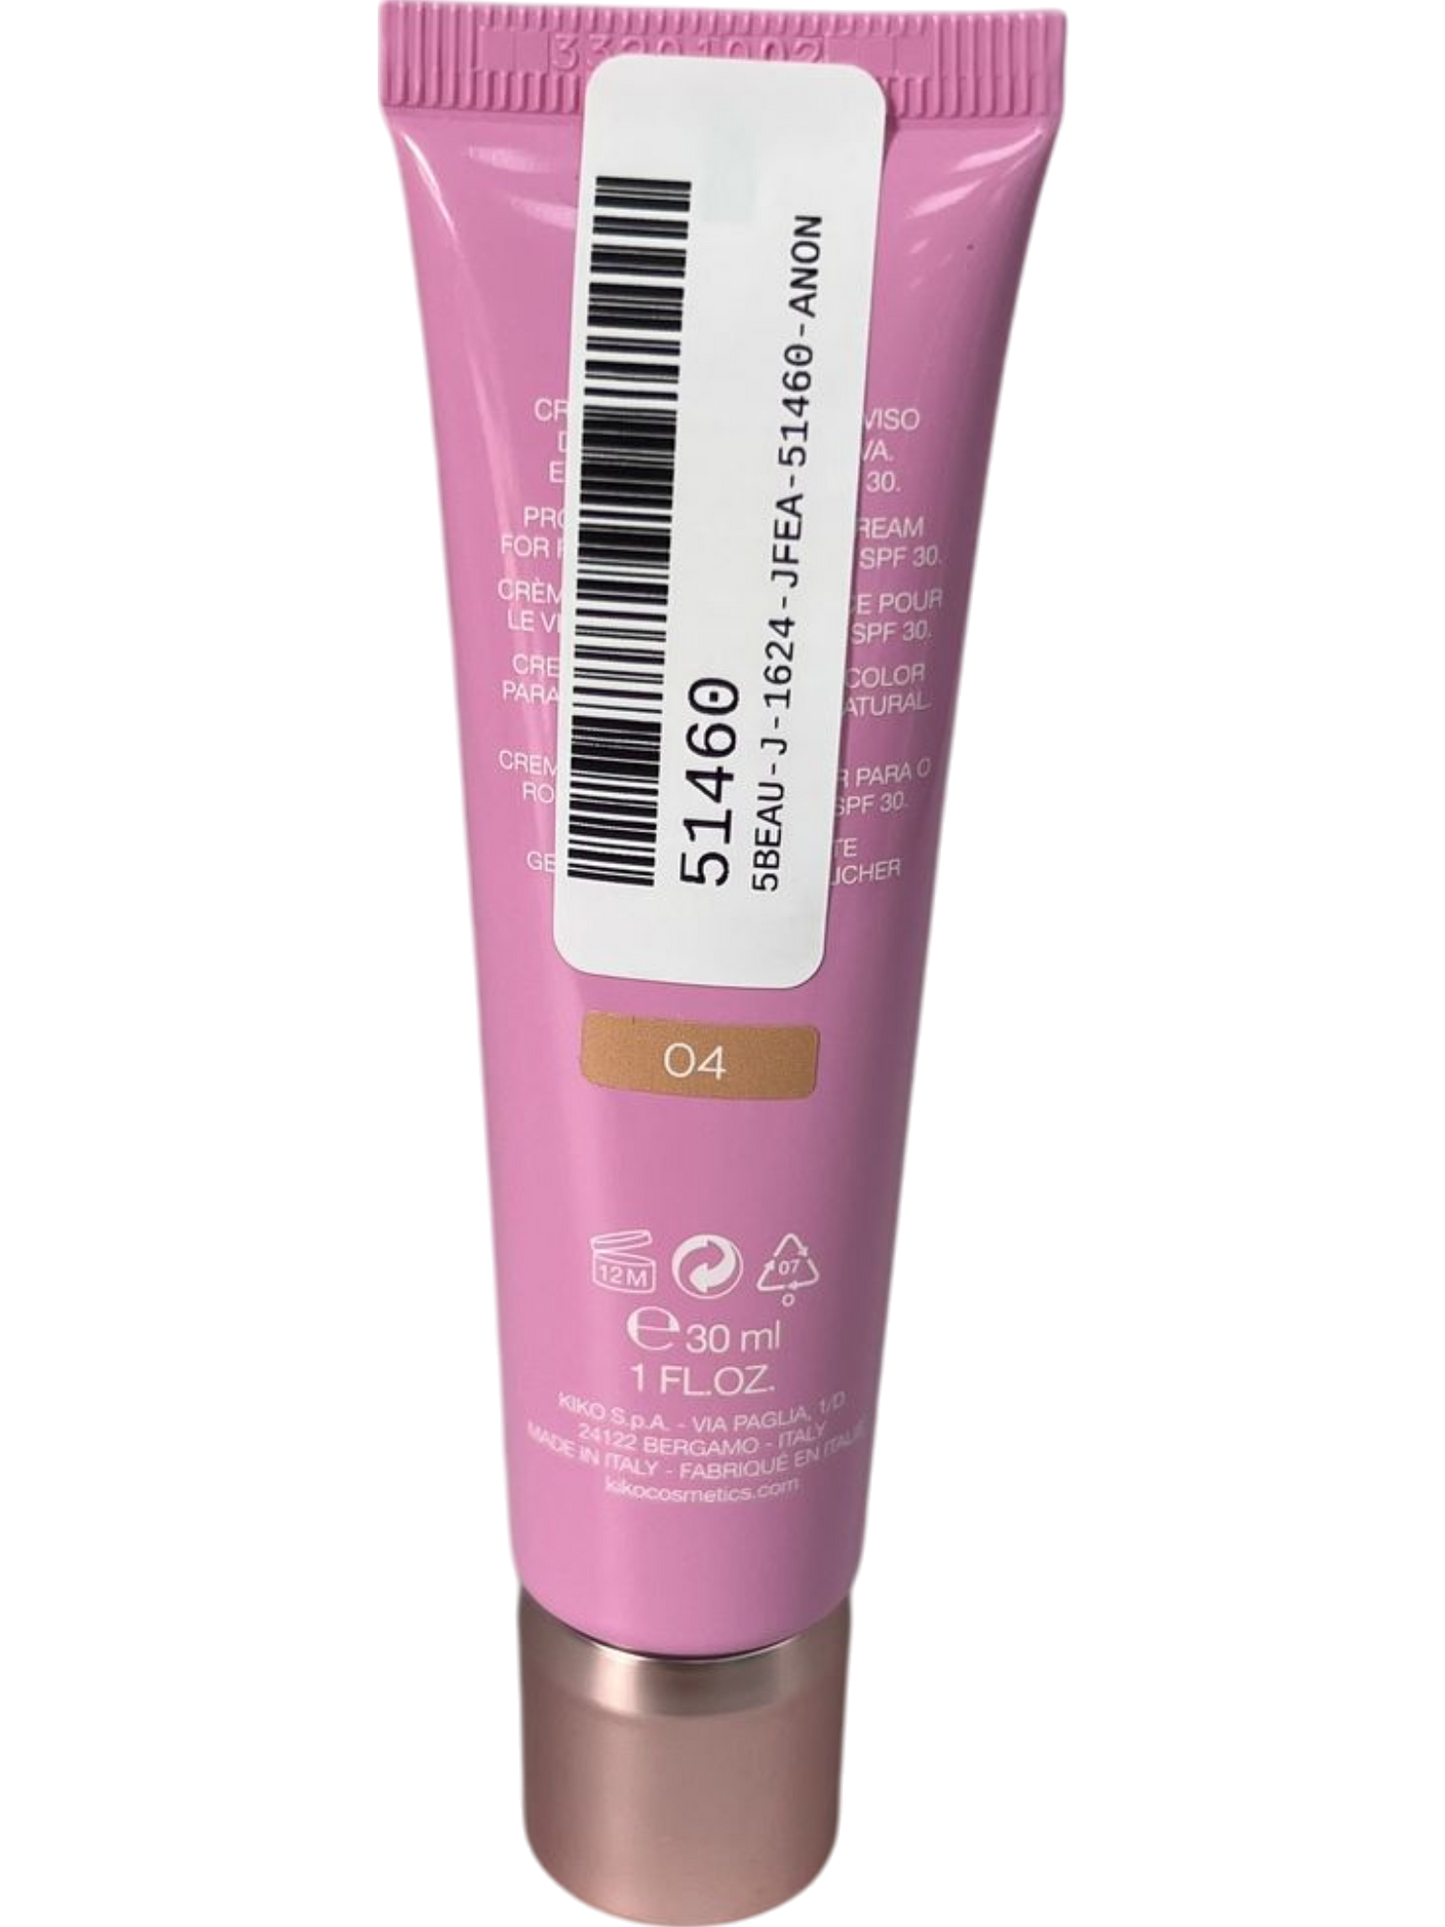 KIKO Milano Pink Days in Bloom Natural Touch BB Cream SPF50